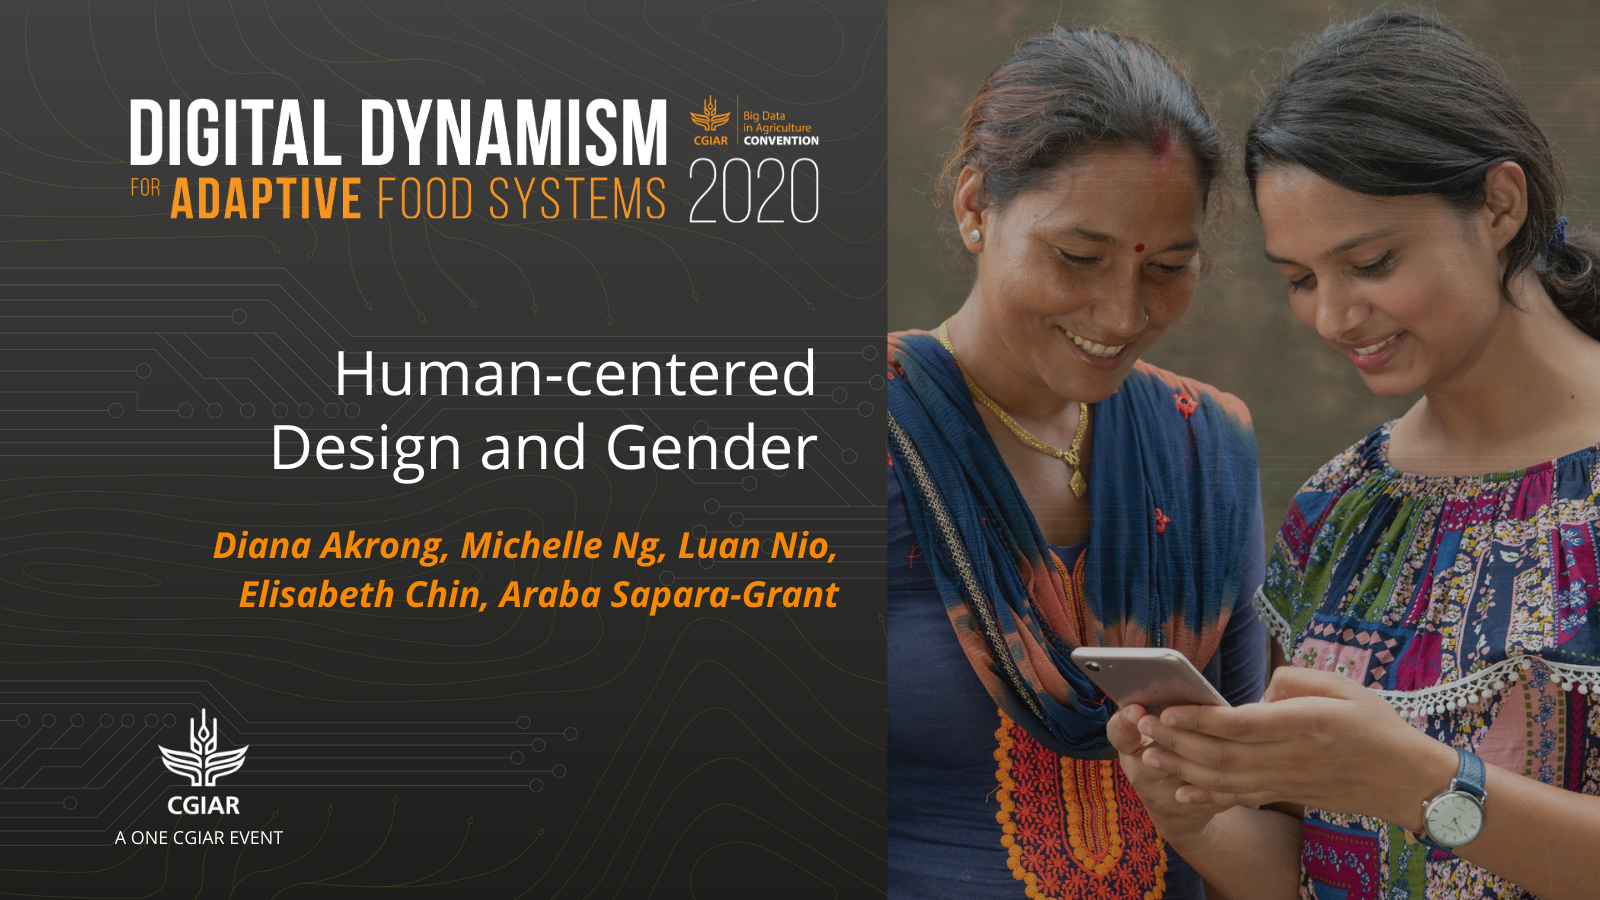 2020 Convention session - Human-centered Design and Gender